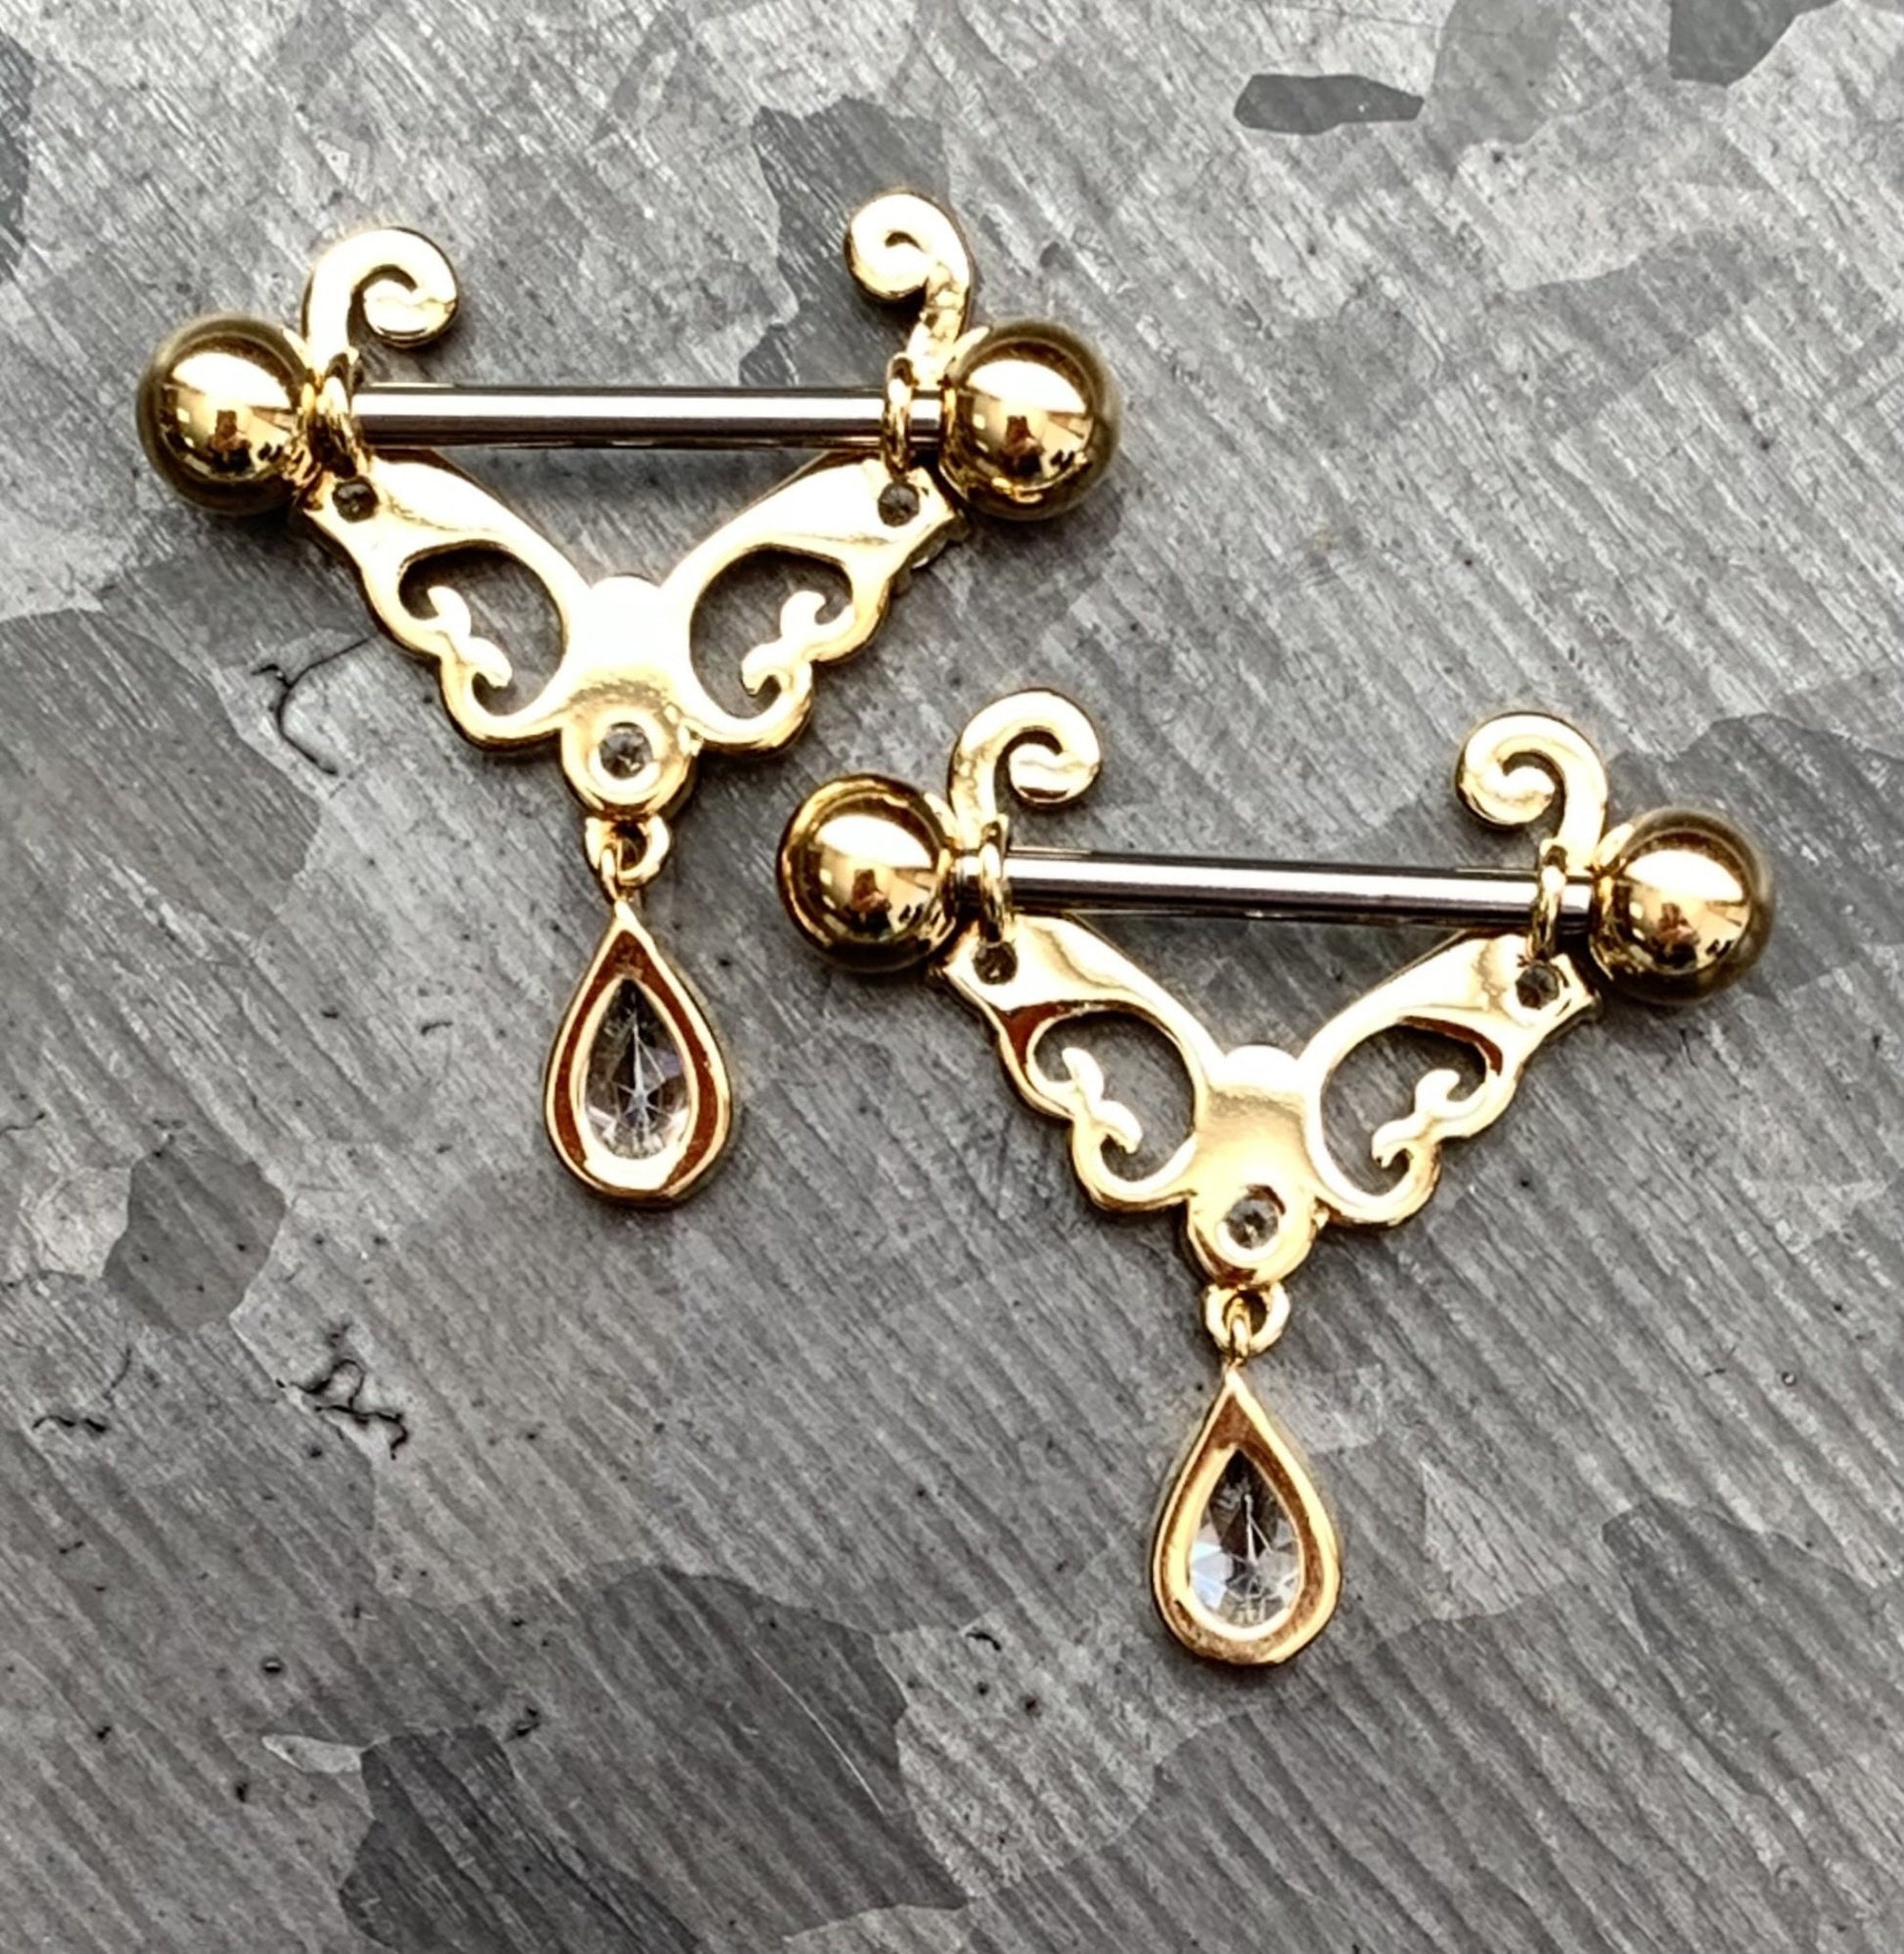 PAIR of Heart Filigree with CZ Teardrop Gem Steel Nipple Barbells/Shields/Rings - 16g, 10mm wearable length in Silver, Gold & Rose Gold!